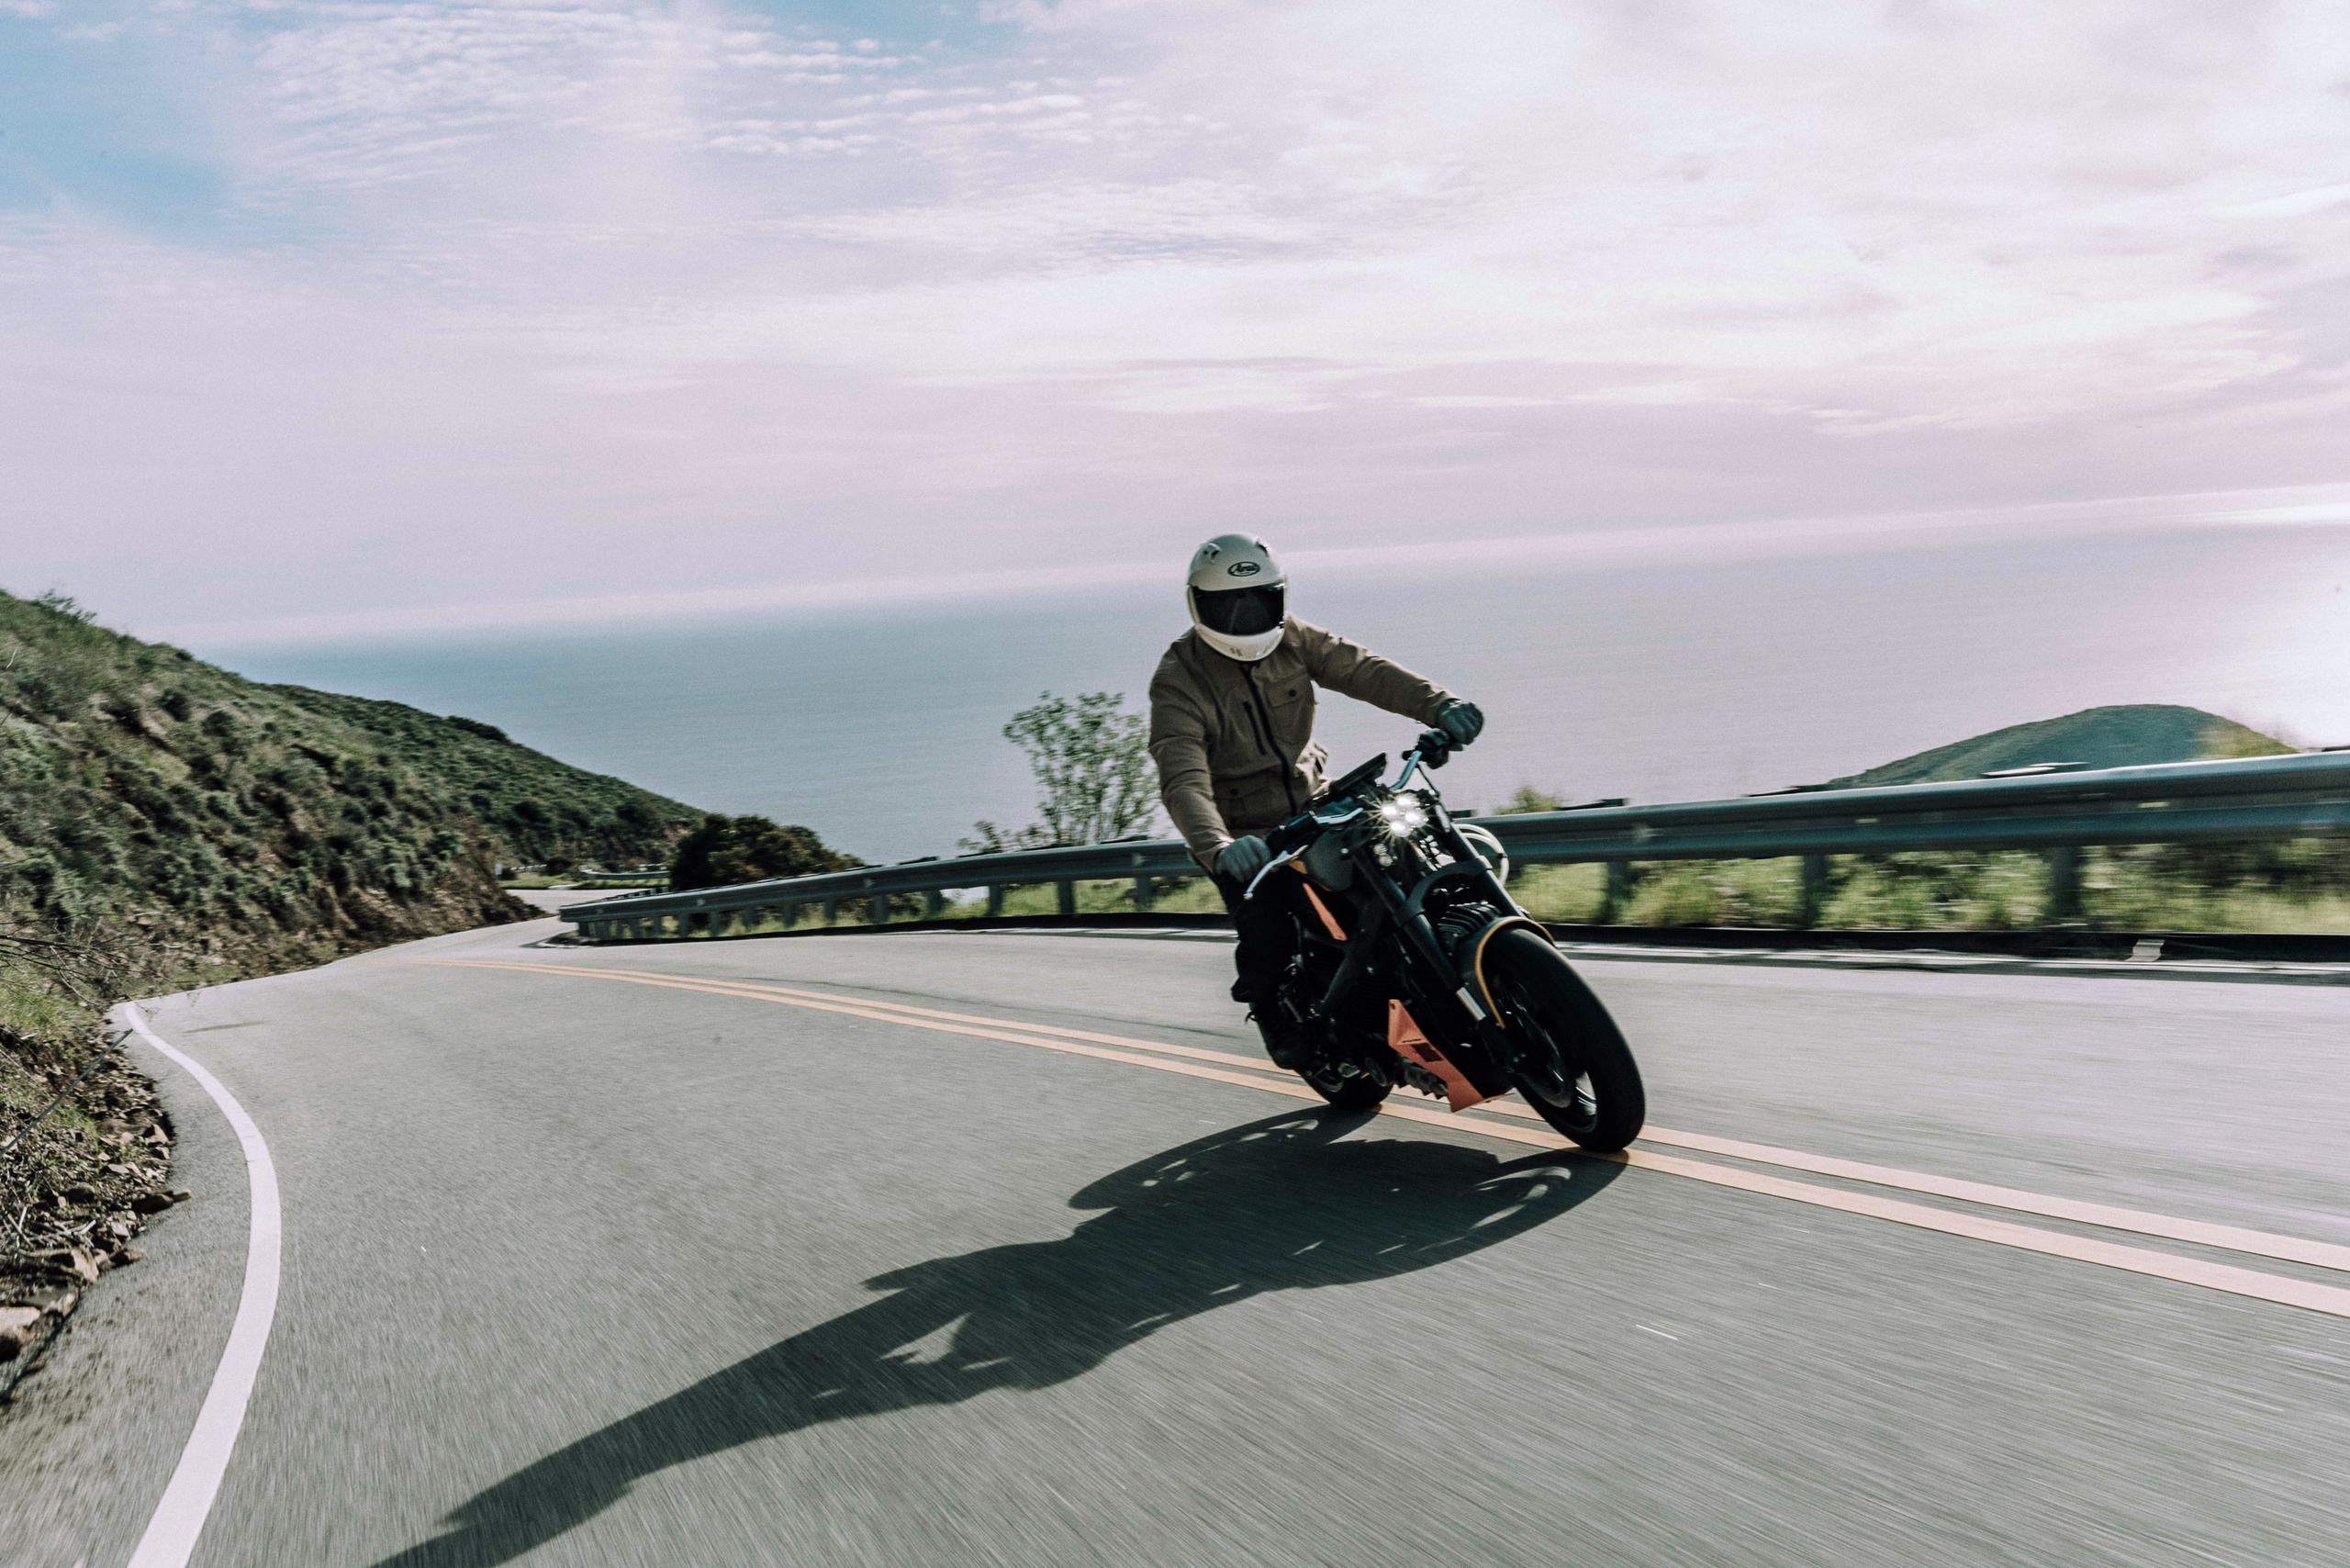 Motorcyclist riding up hills in Malibu with Pacific Ocean in the background